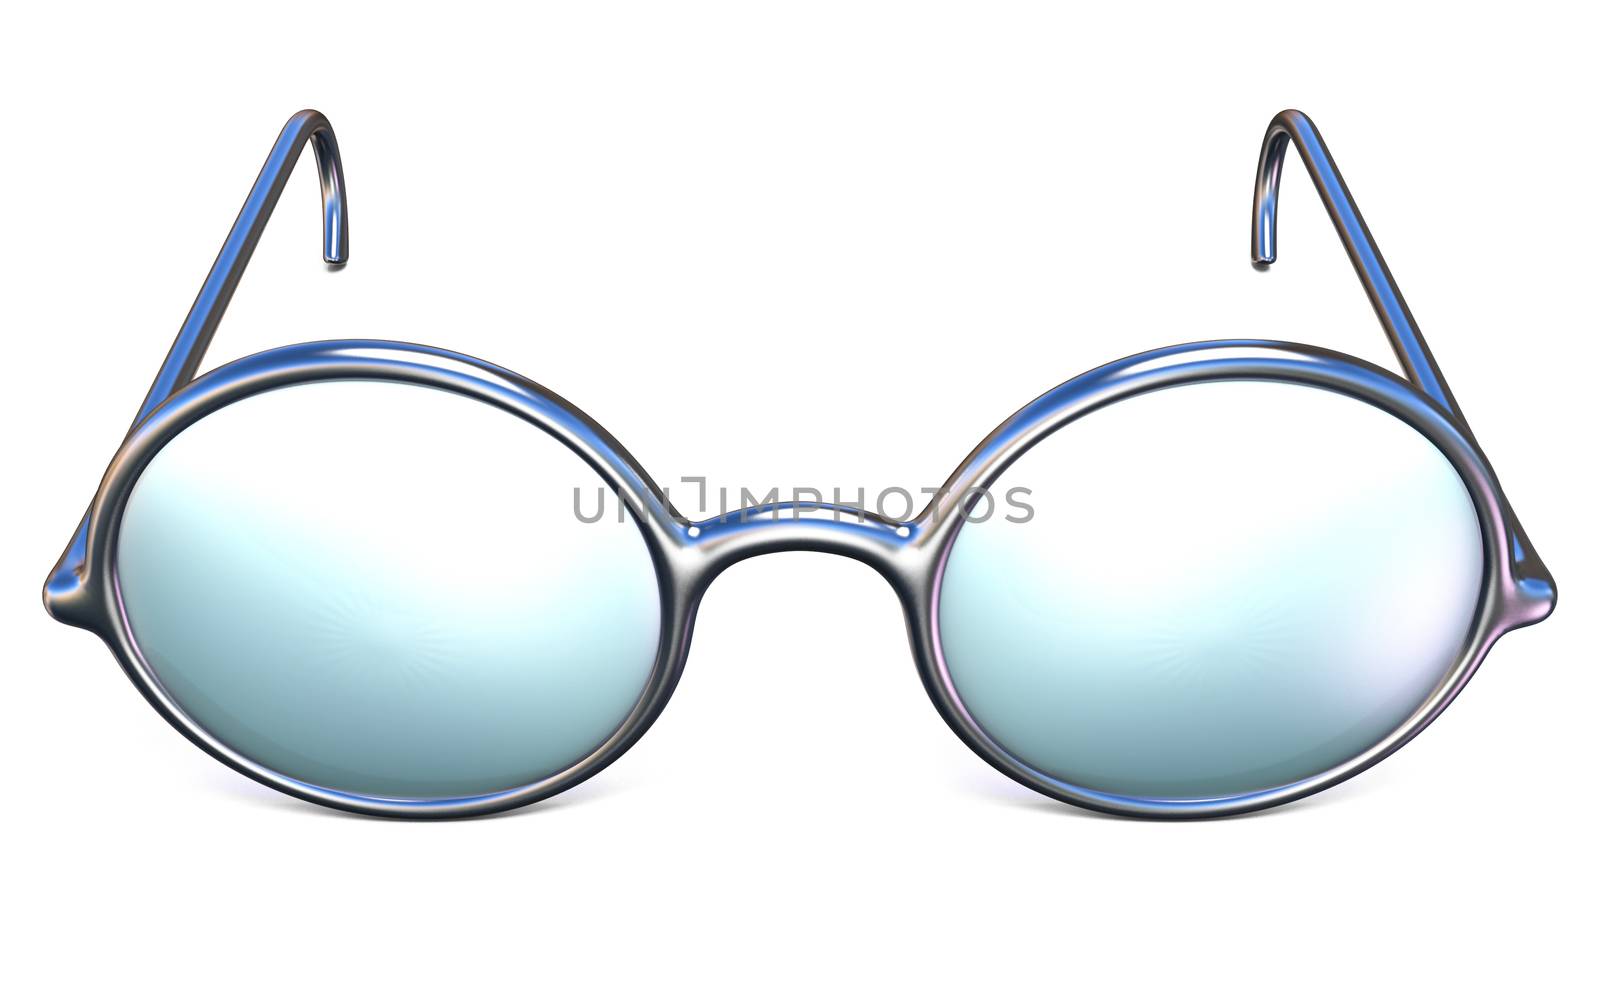 Retro silver glasses front view 3D by djmilic